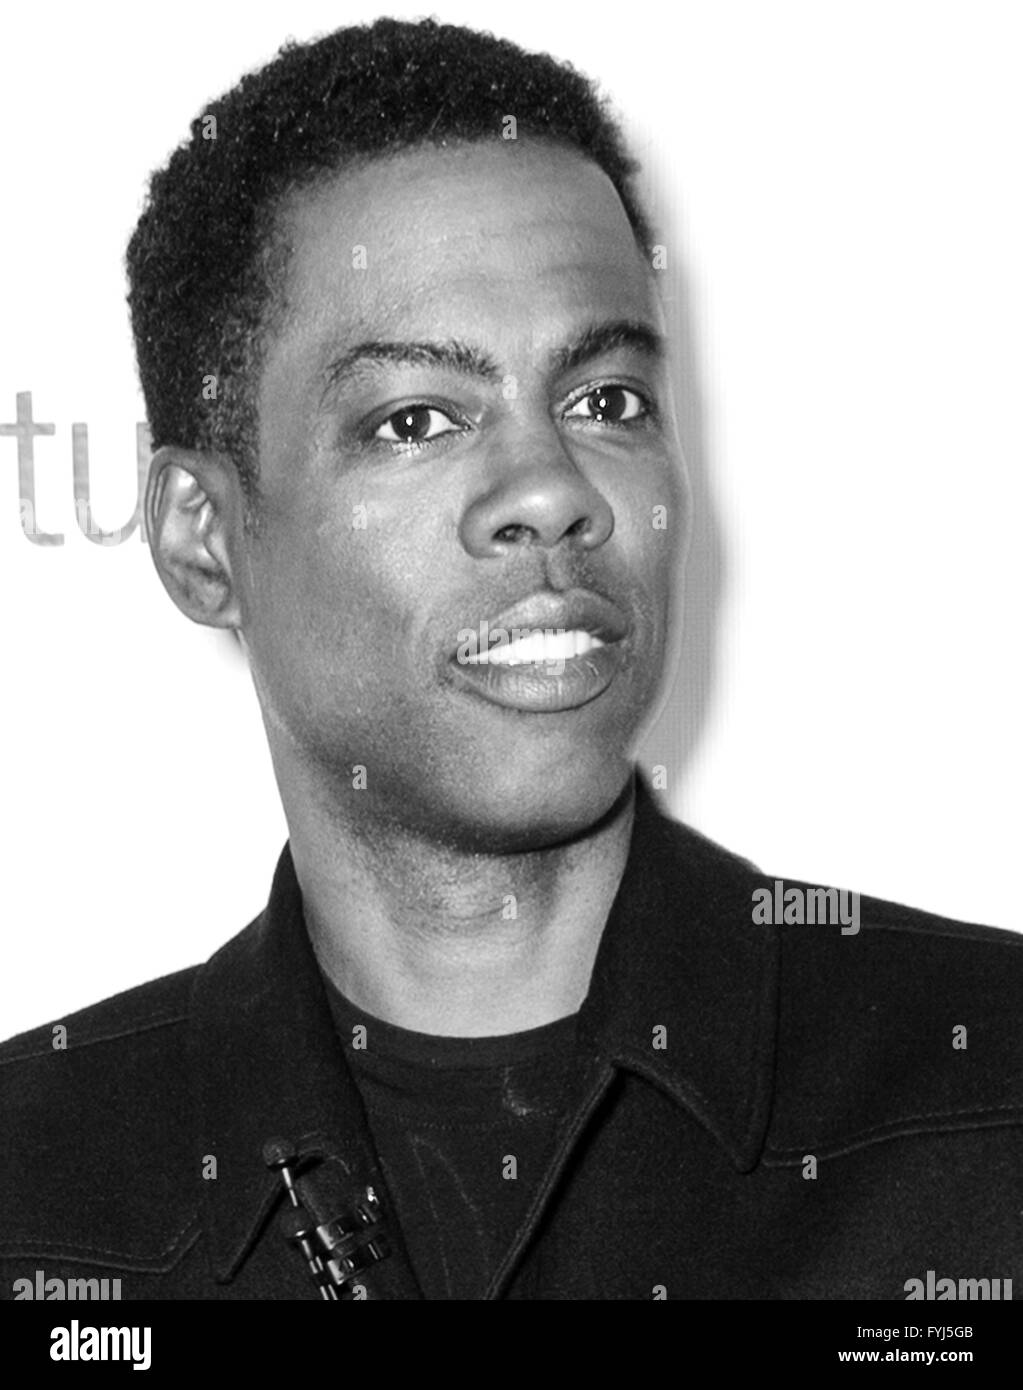 Comedian chris rock Black and White Stock Photos & Images - Alamy